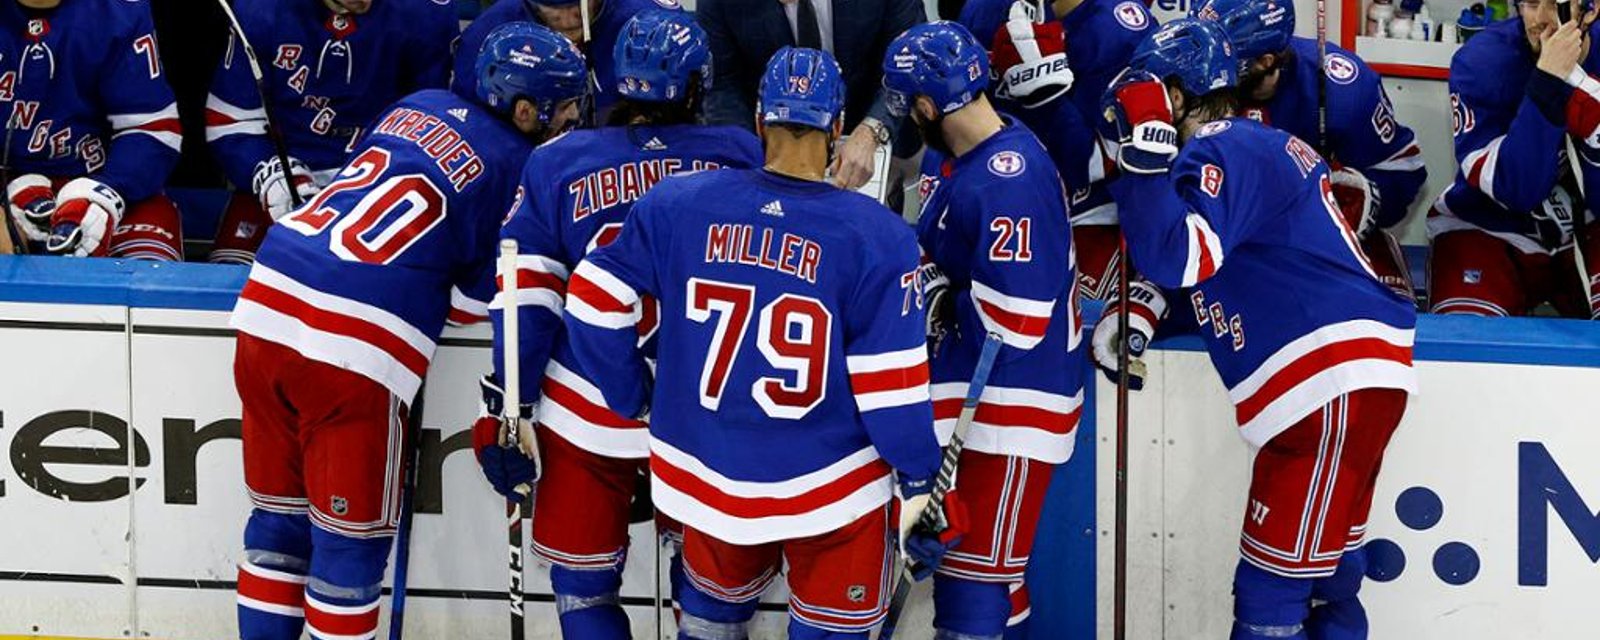 Rangers set to make the biggest splash on the trade front